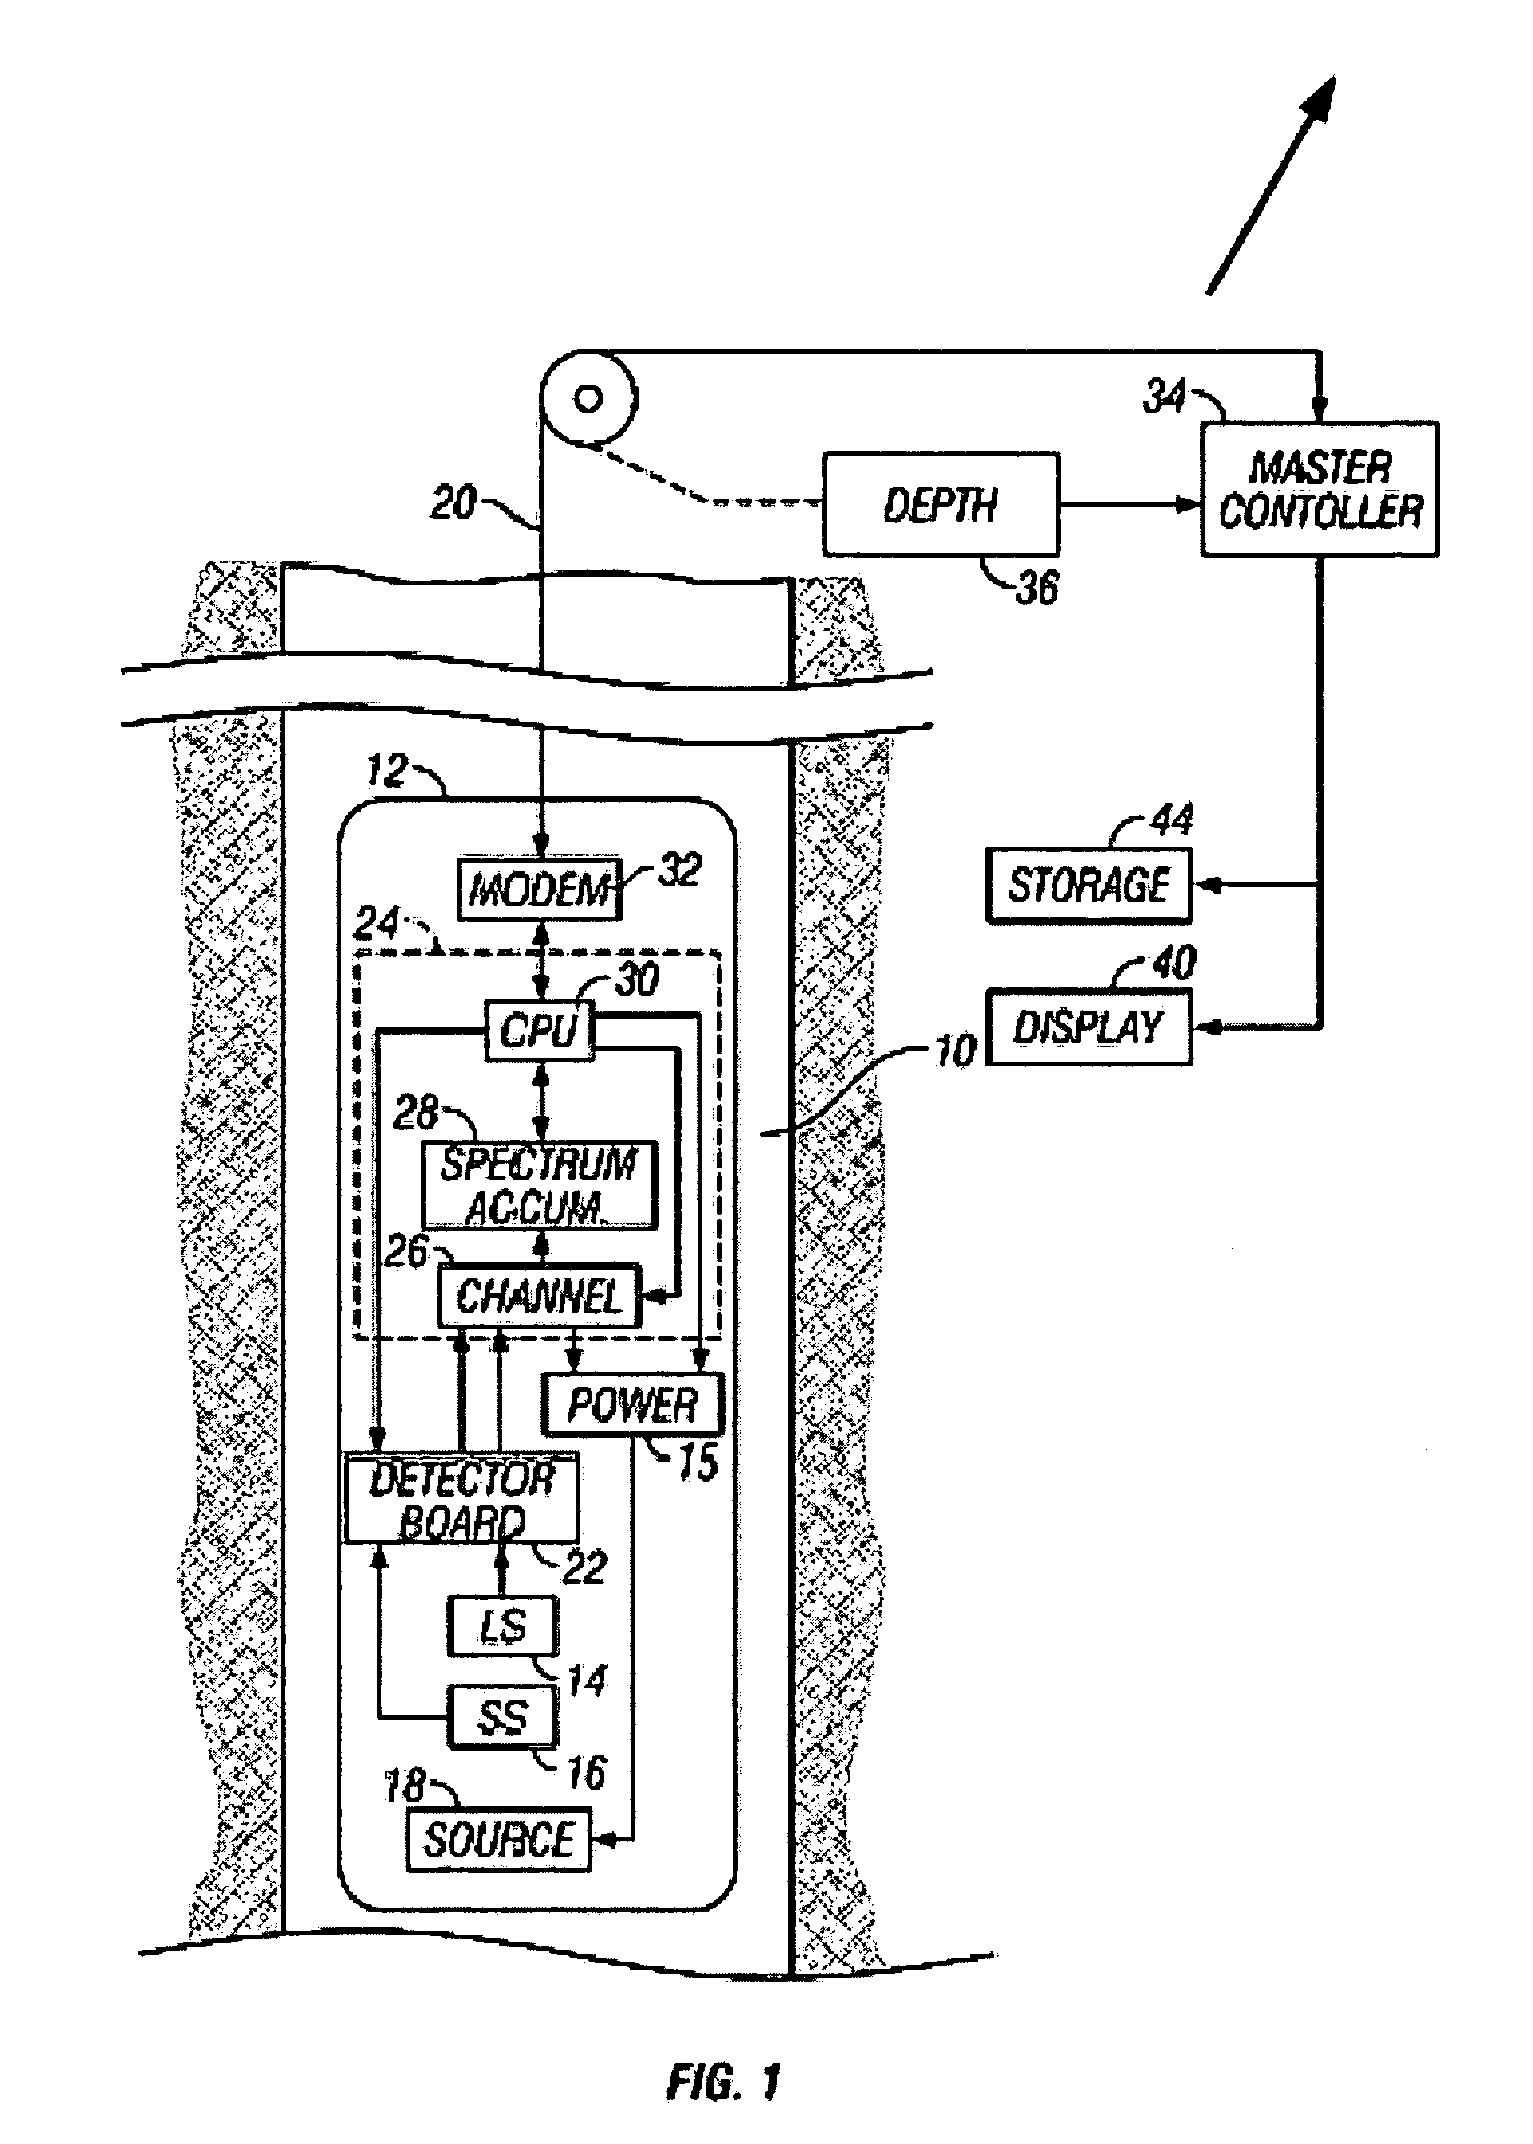 Method and apparatus for determining aluminum concentration in earth formations